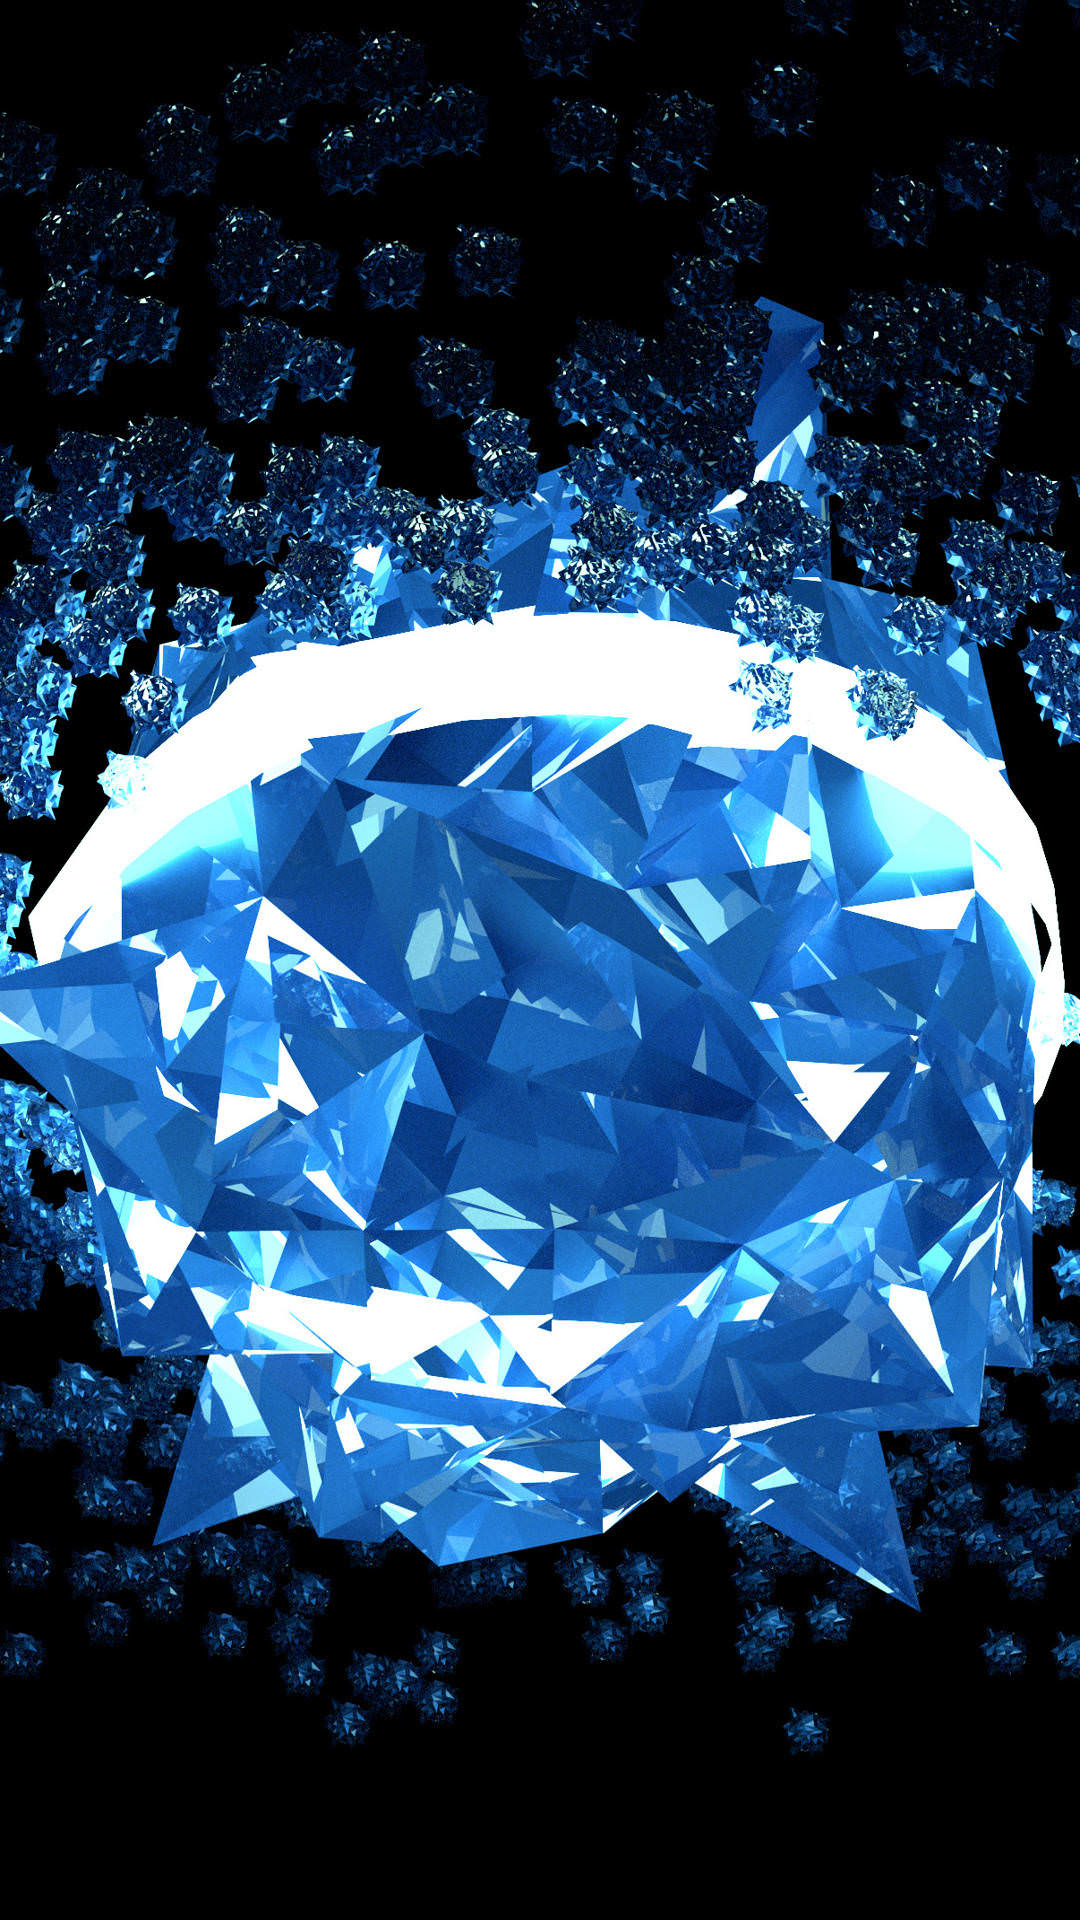 Crystal, Blue crystal wallpapers, PSD files, Vector EPS, 1080x1920 Full HD Handy